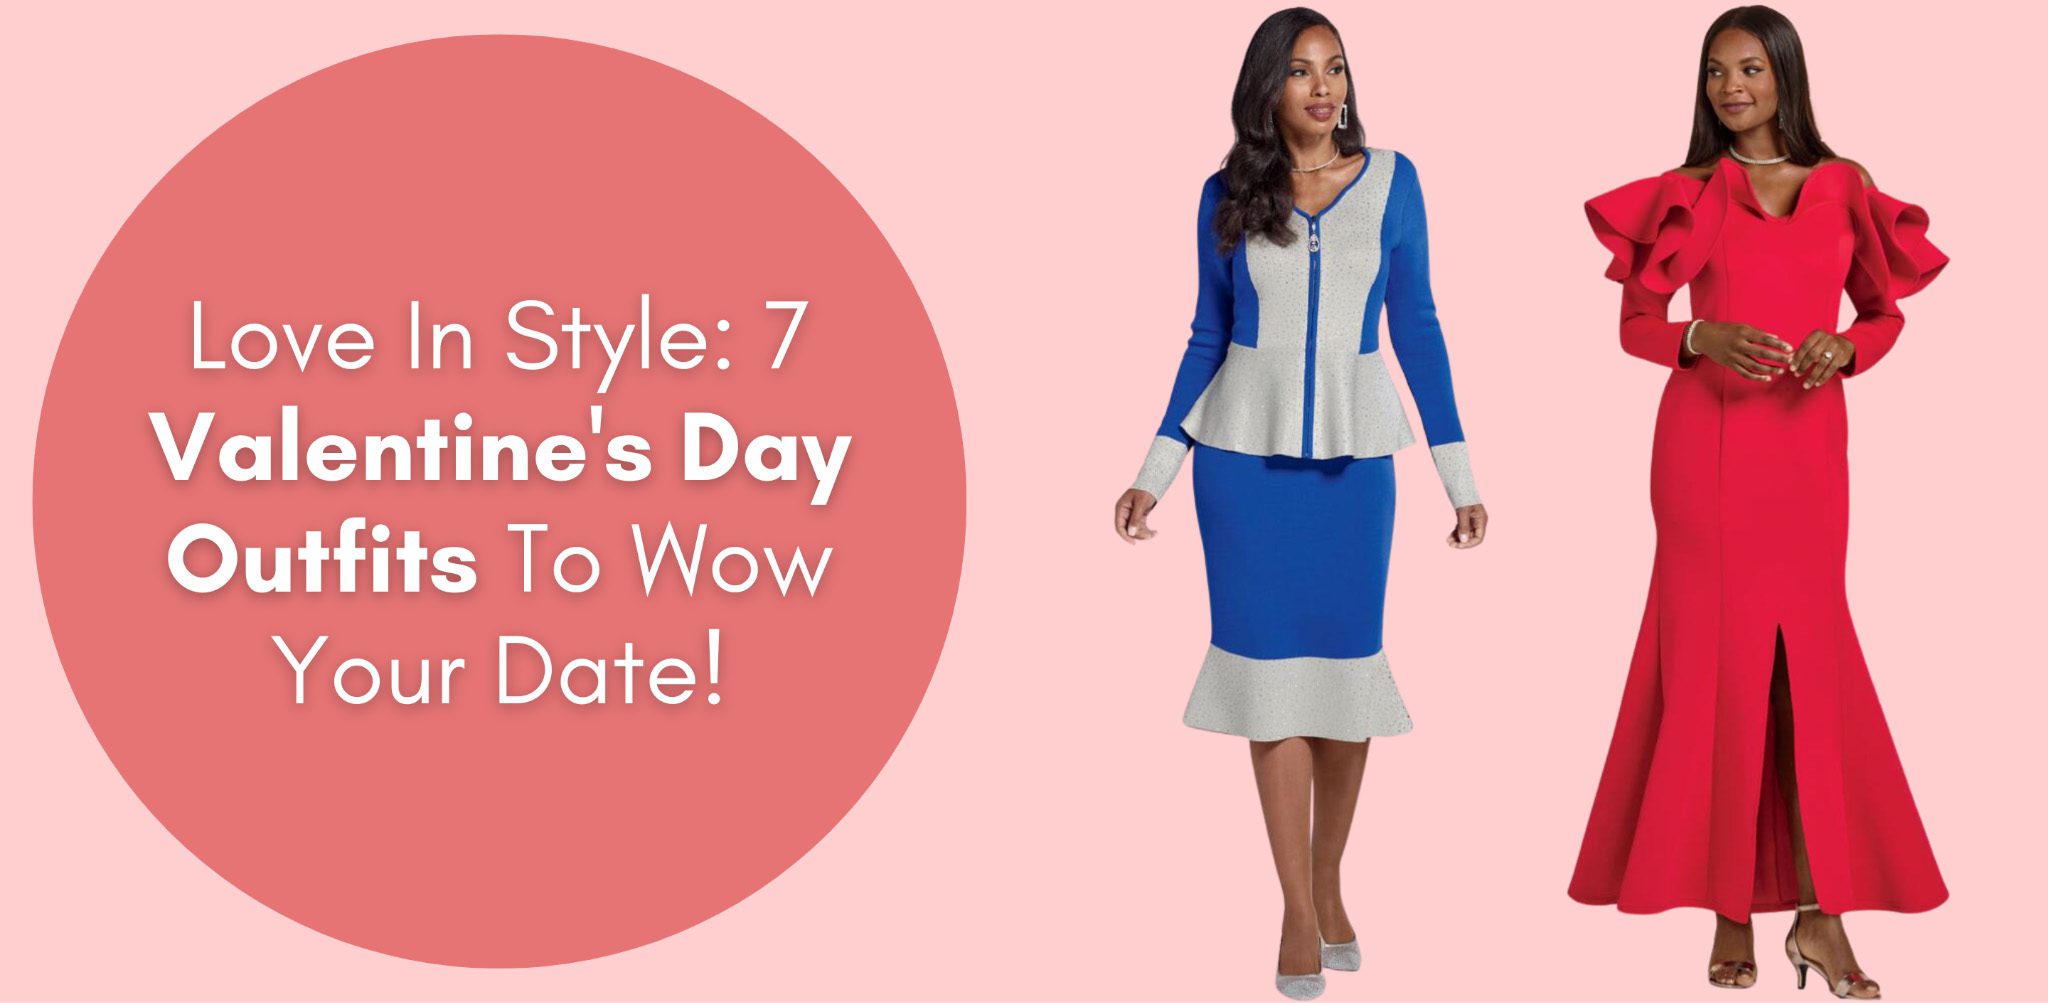 Love In Style: 7 Valentine’s Day Outfits To Wow Your Date!